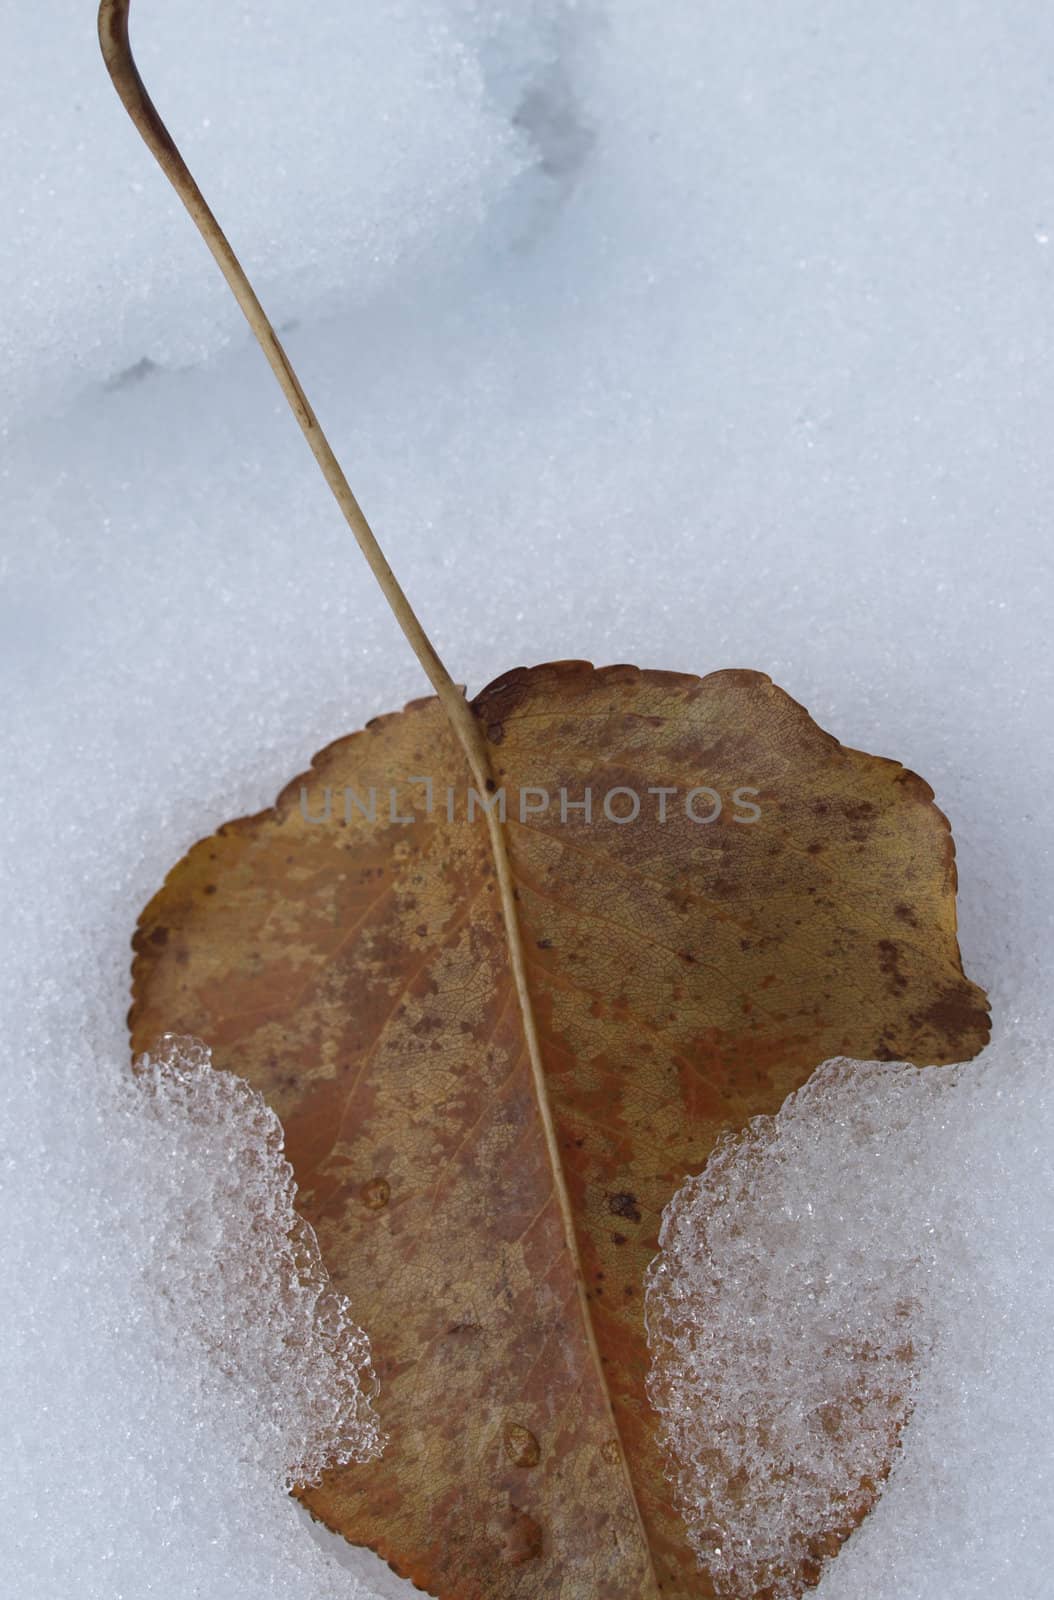 A leaf in the snow shown up close